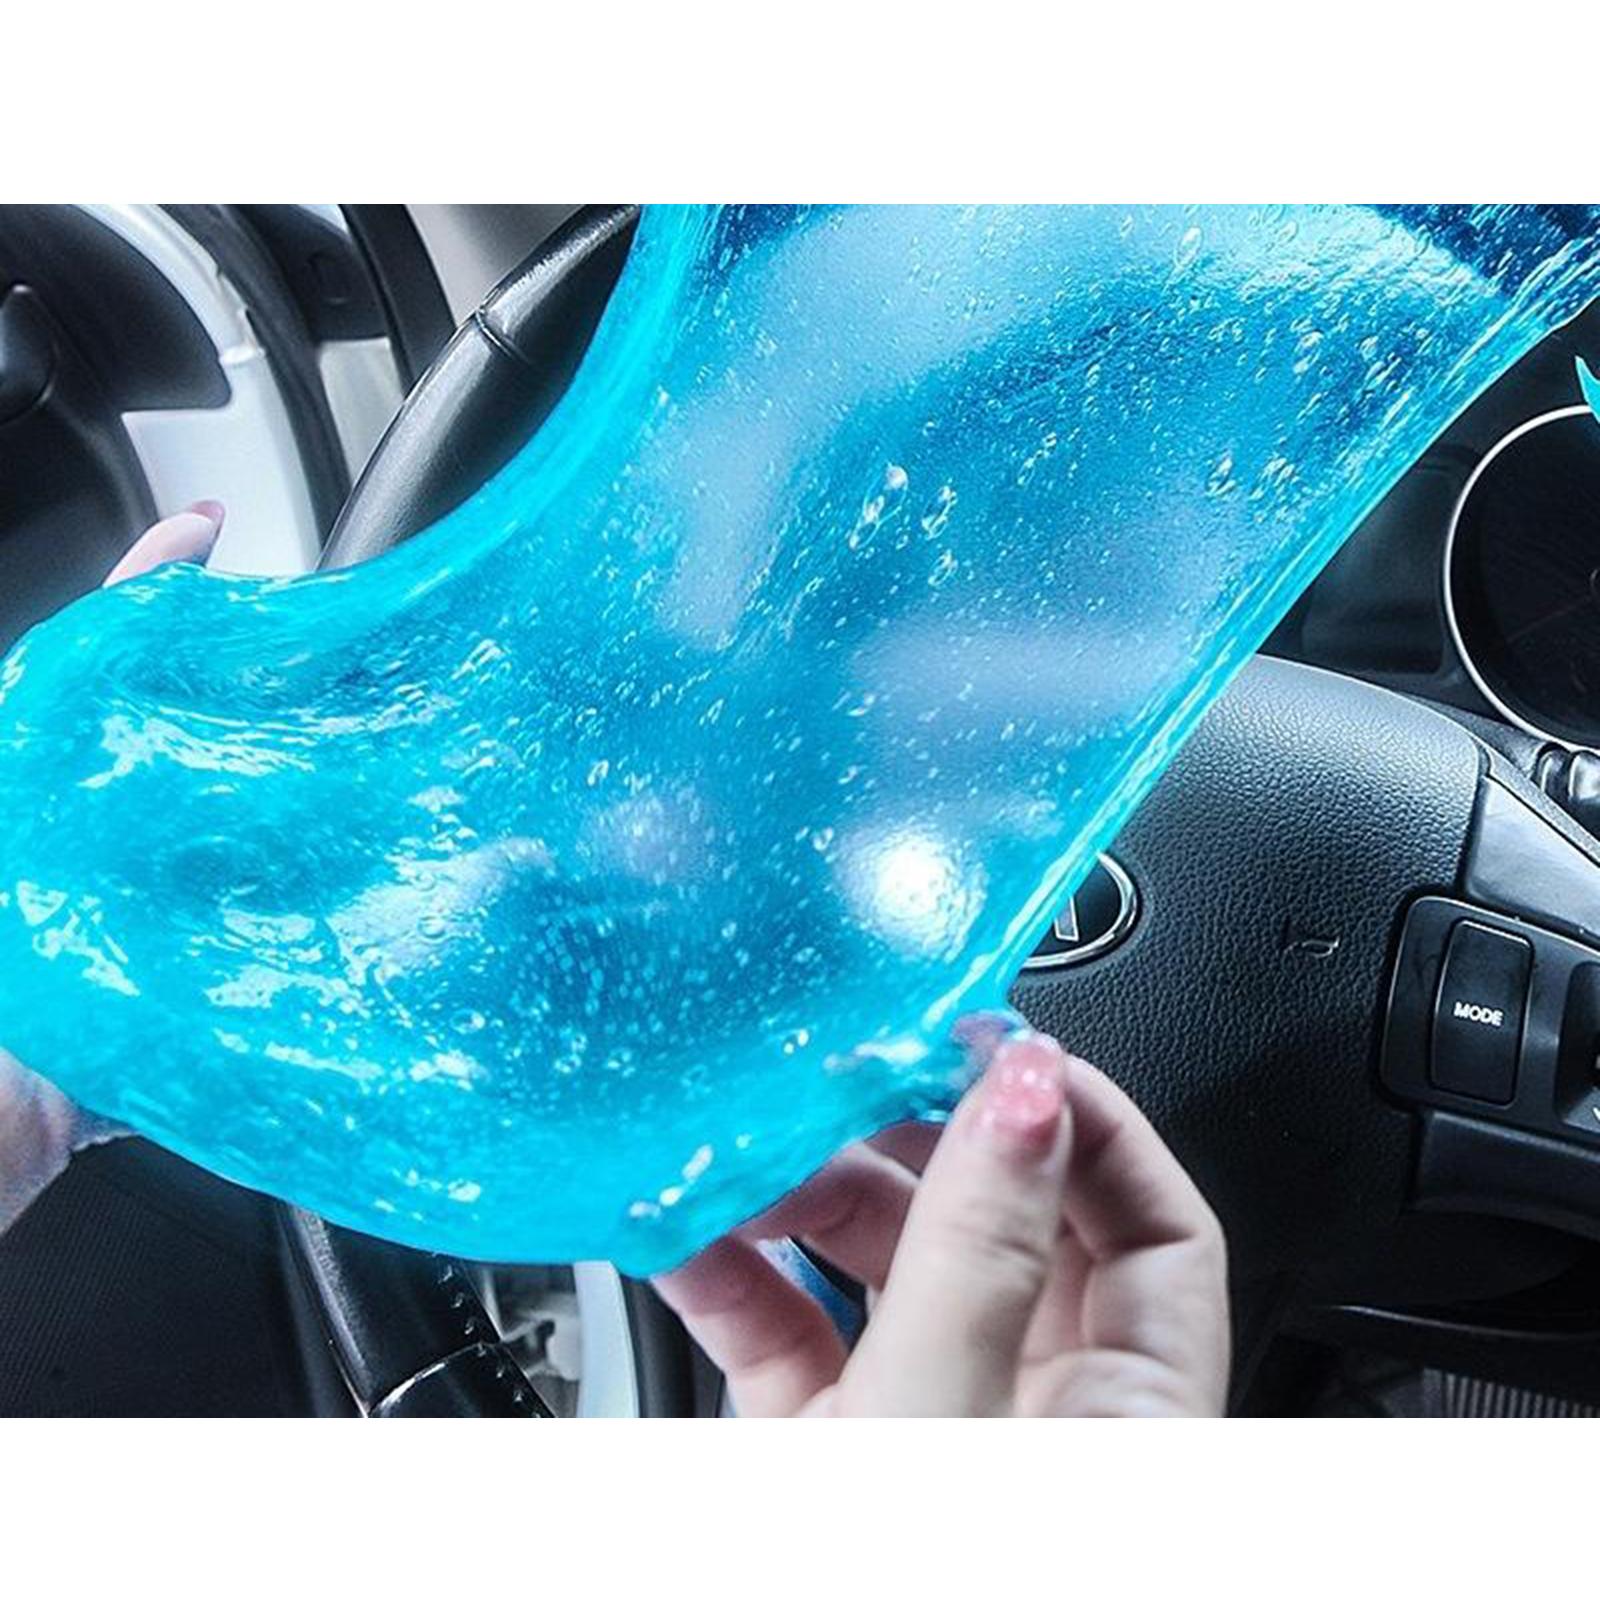 Slime Cleaning Gel Cleaner Car Computer Laptop Keyboard Dust Cleaning  200g